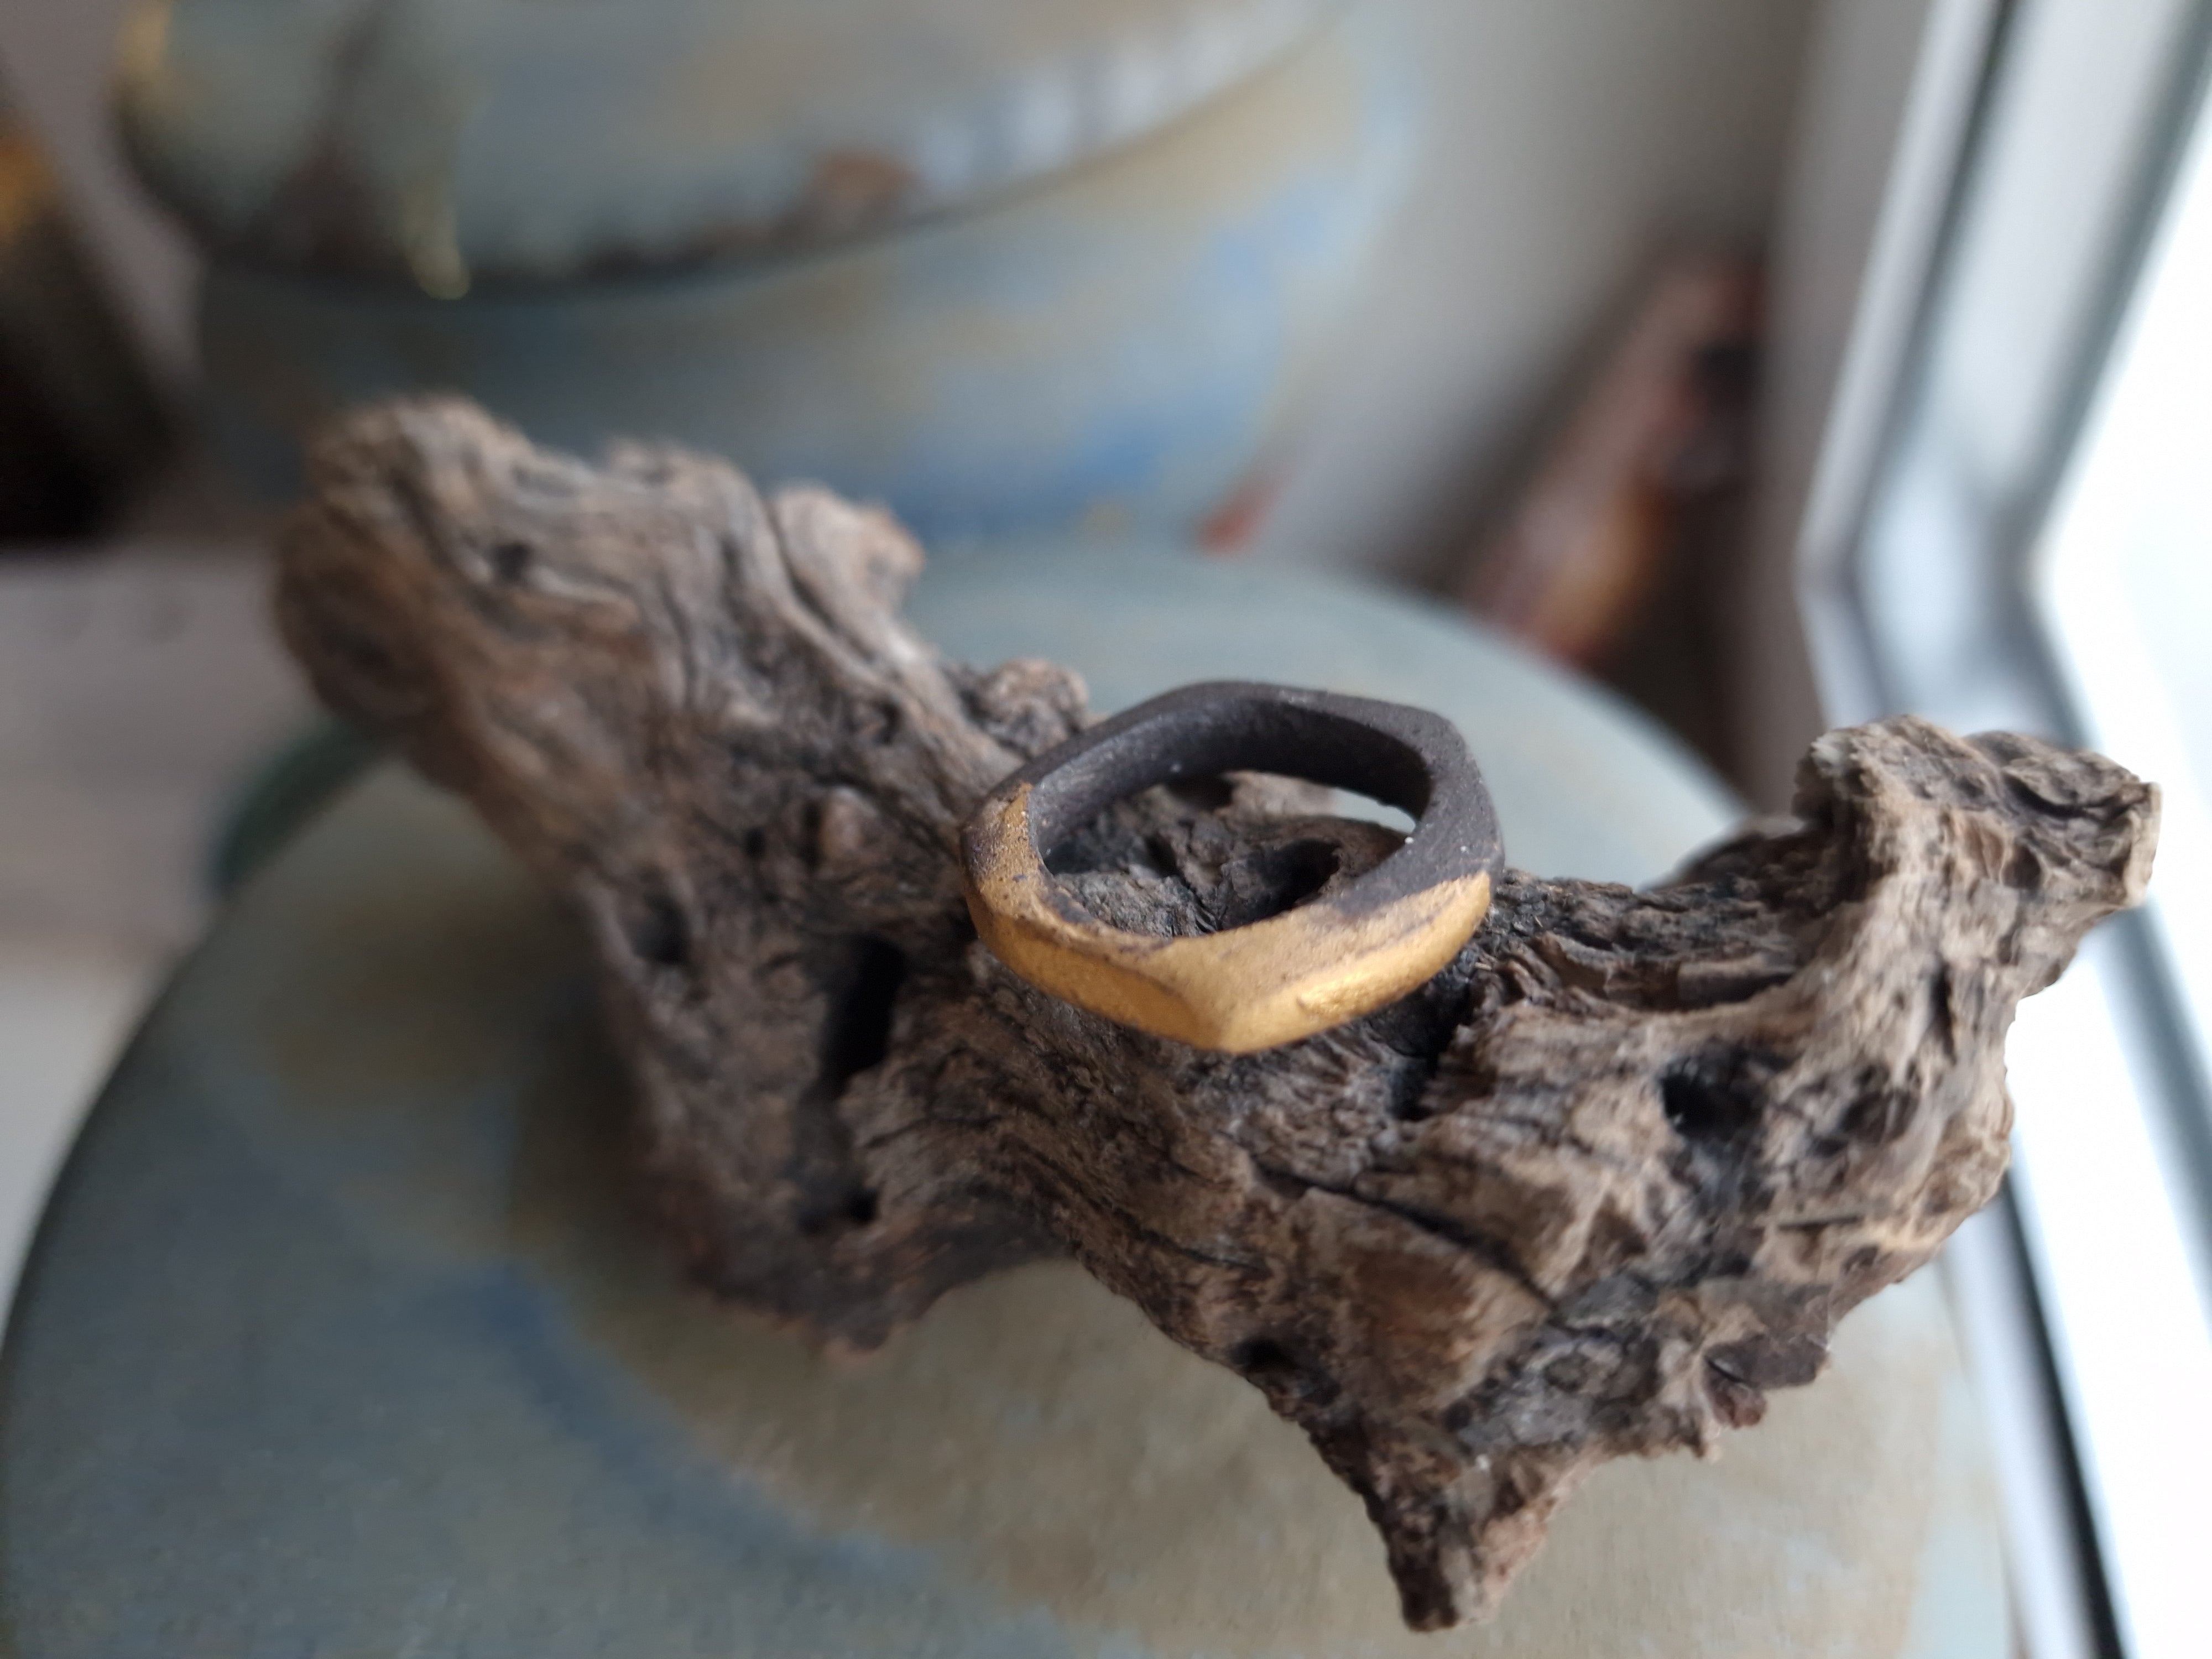 Ceramic Handcrafted Rings | Handmade Jewelry | Unique Unisex Rings | Eternity Gold Ring 18ct | Urban Accessory | Black Clay Rings